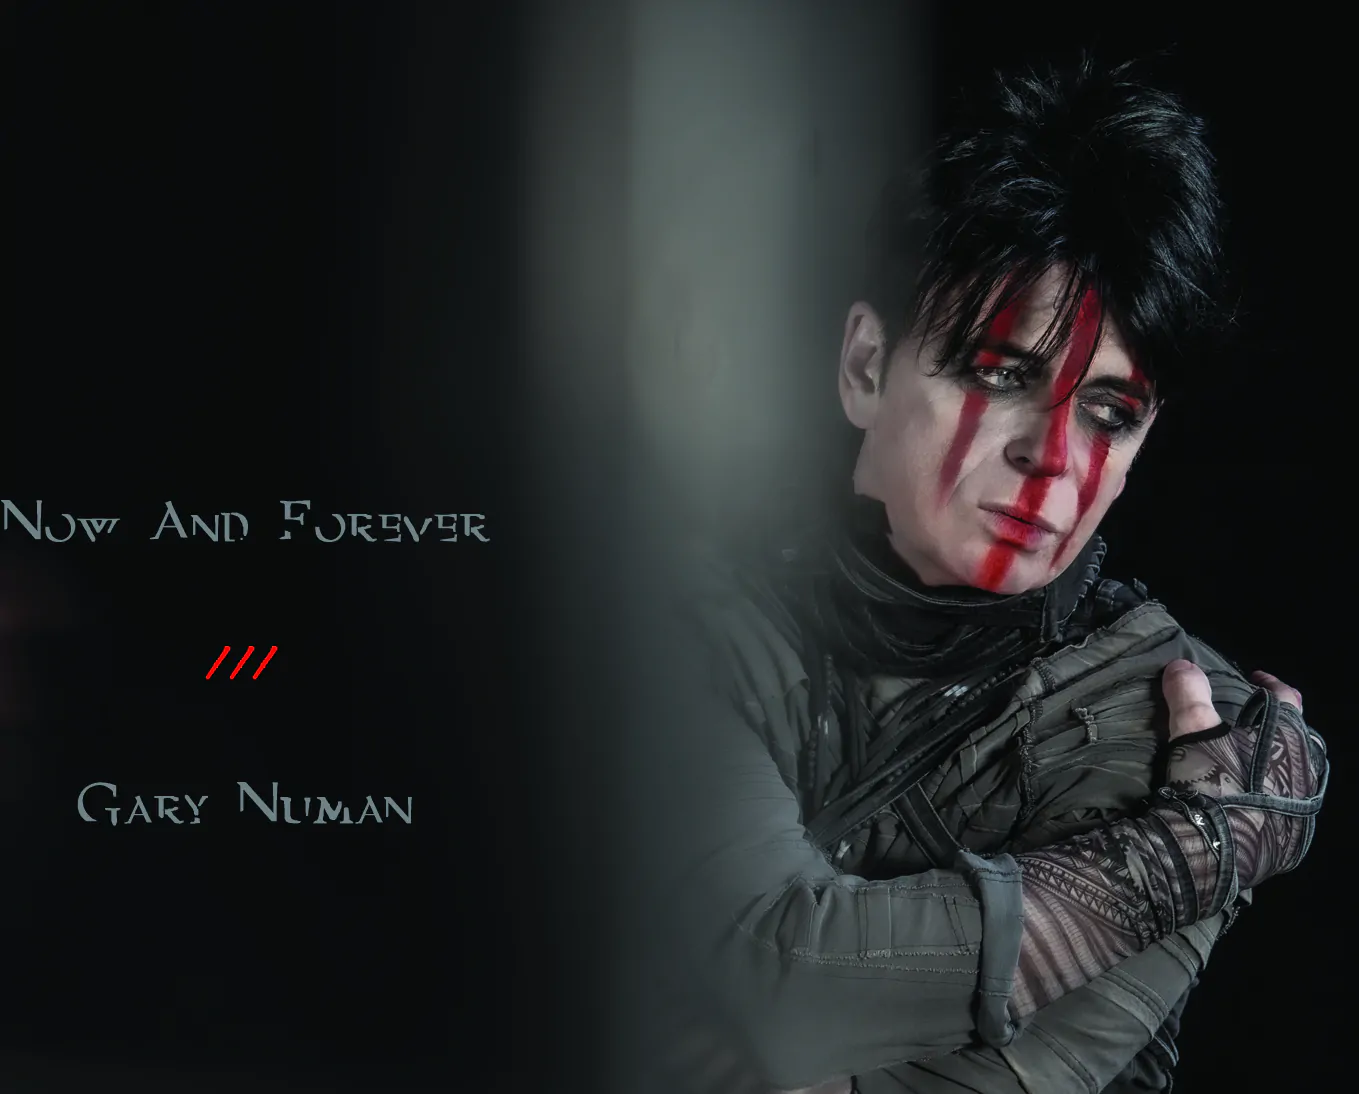 GARY NUMAN shares new single ‘Now And Forever’ ahead of album next month